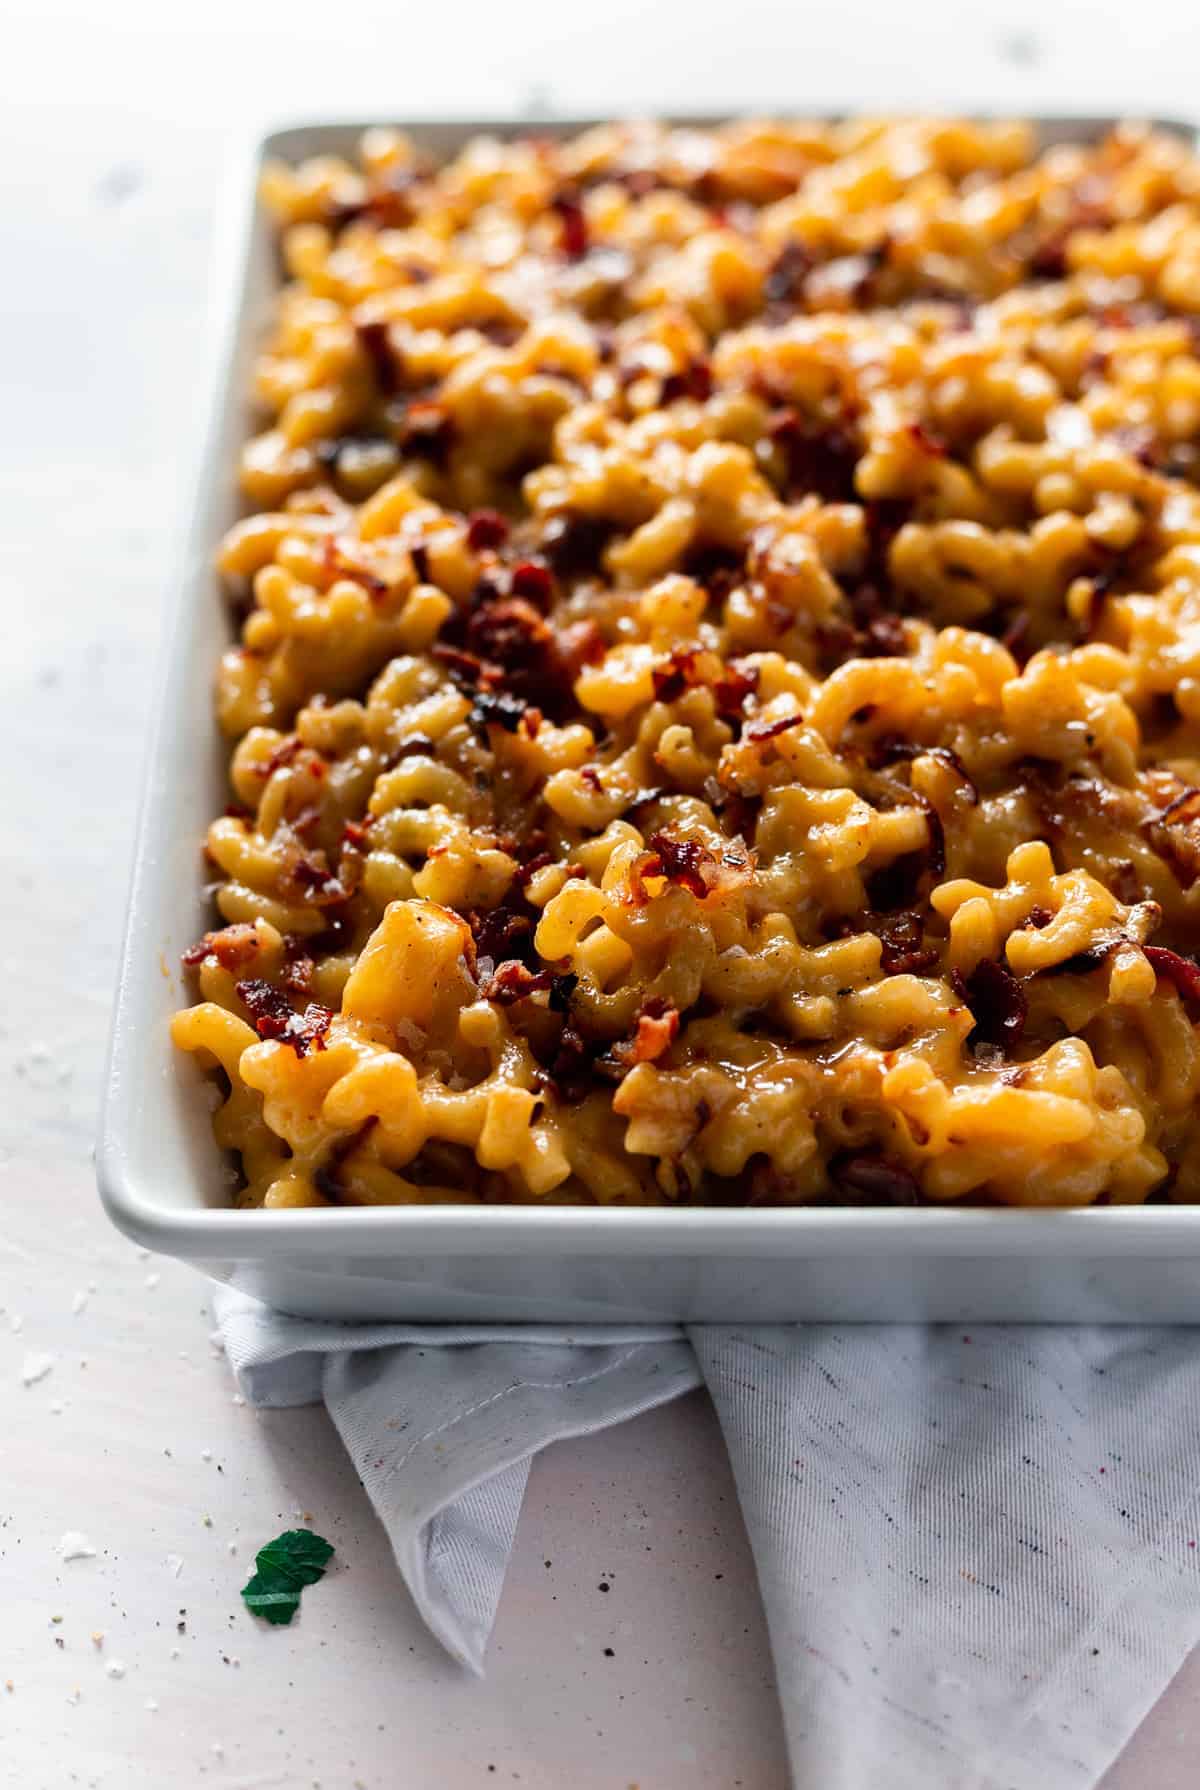 Is there anything better than bacon, caramelized onions, and cheese? According to this Creamy Baked Mac and Cheese with Bacon, absolutely not.